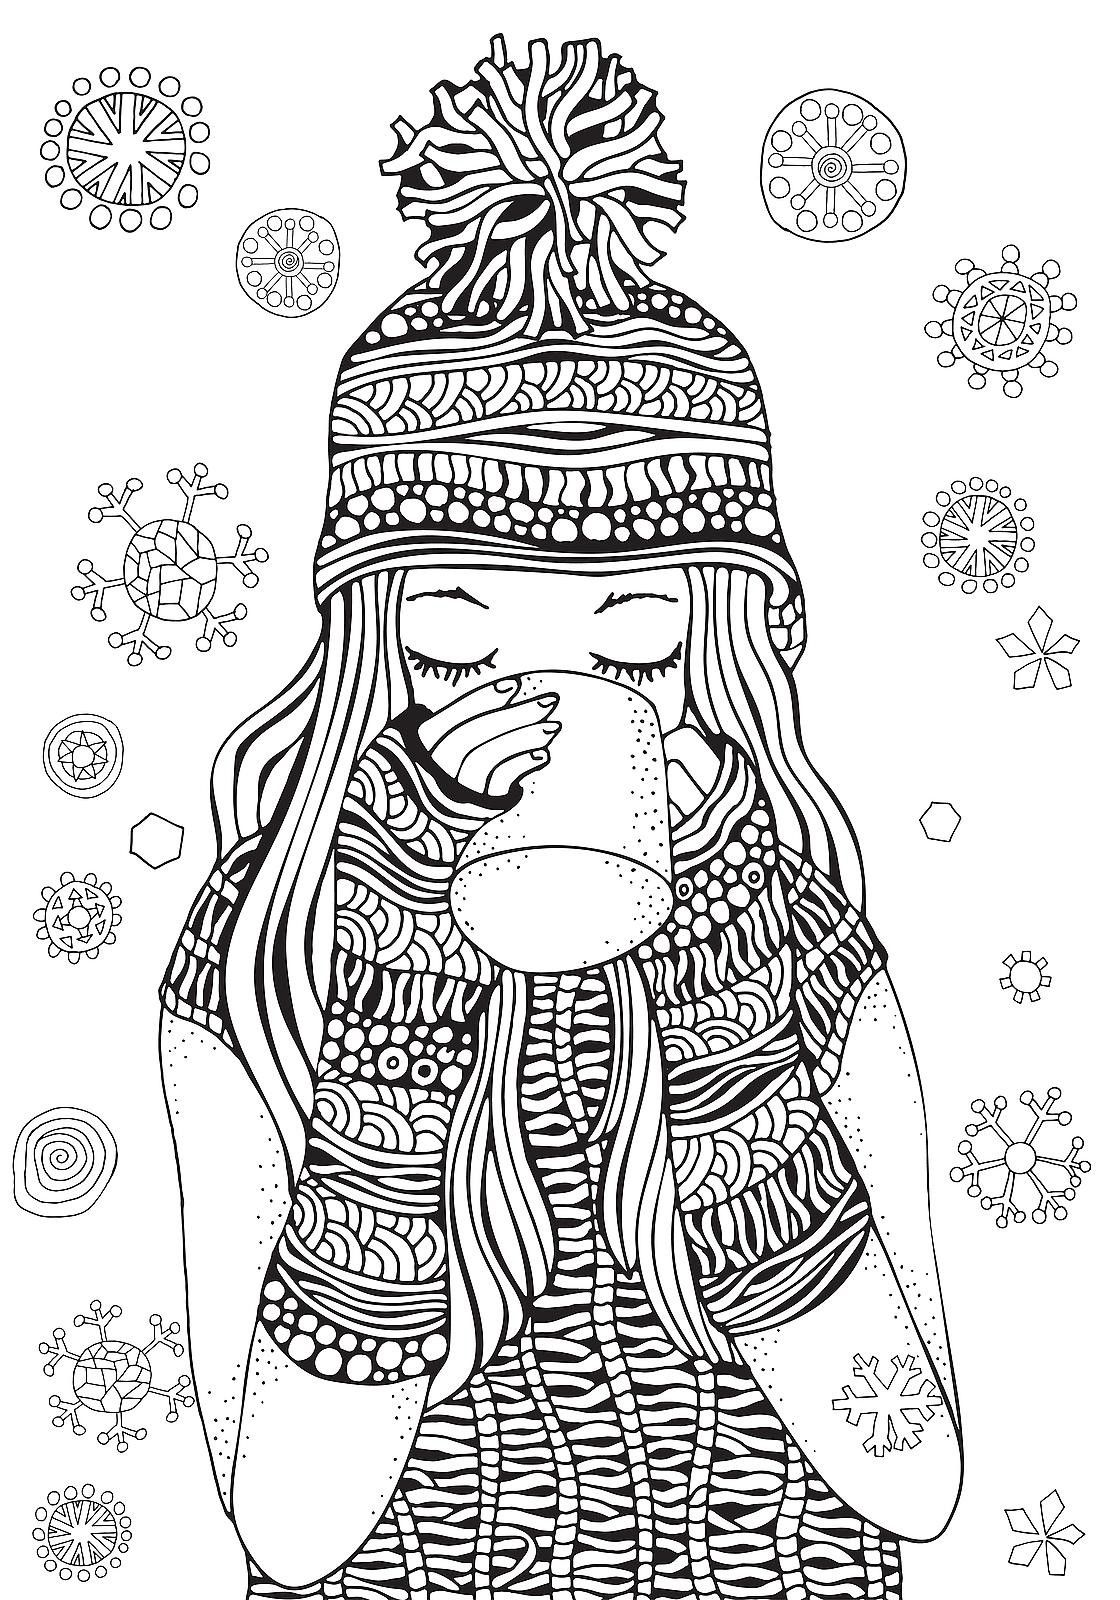 Winter Coloring Pages For Kids
 Winter Puzzle & Coloring Pages Printable Winter Themed